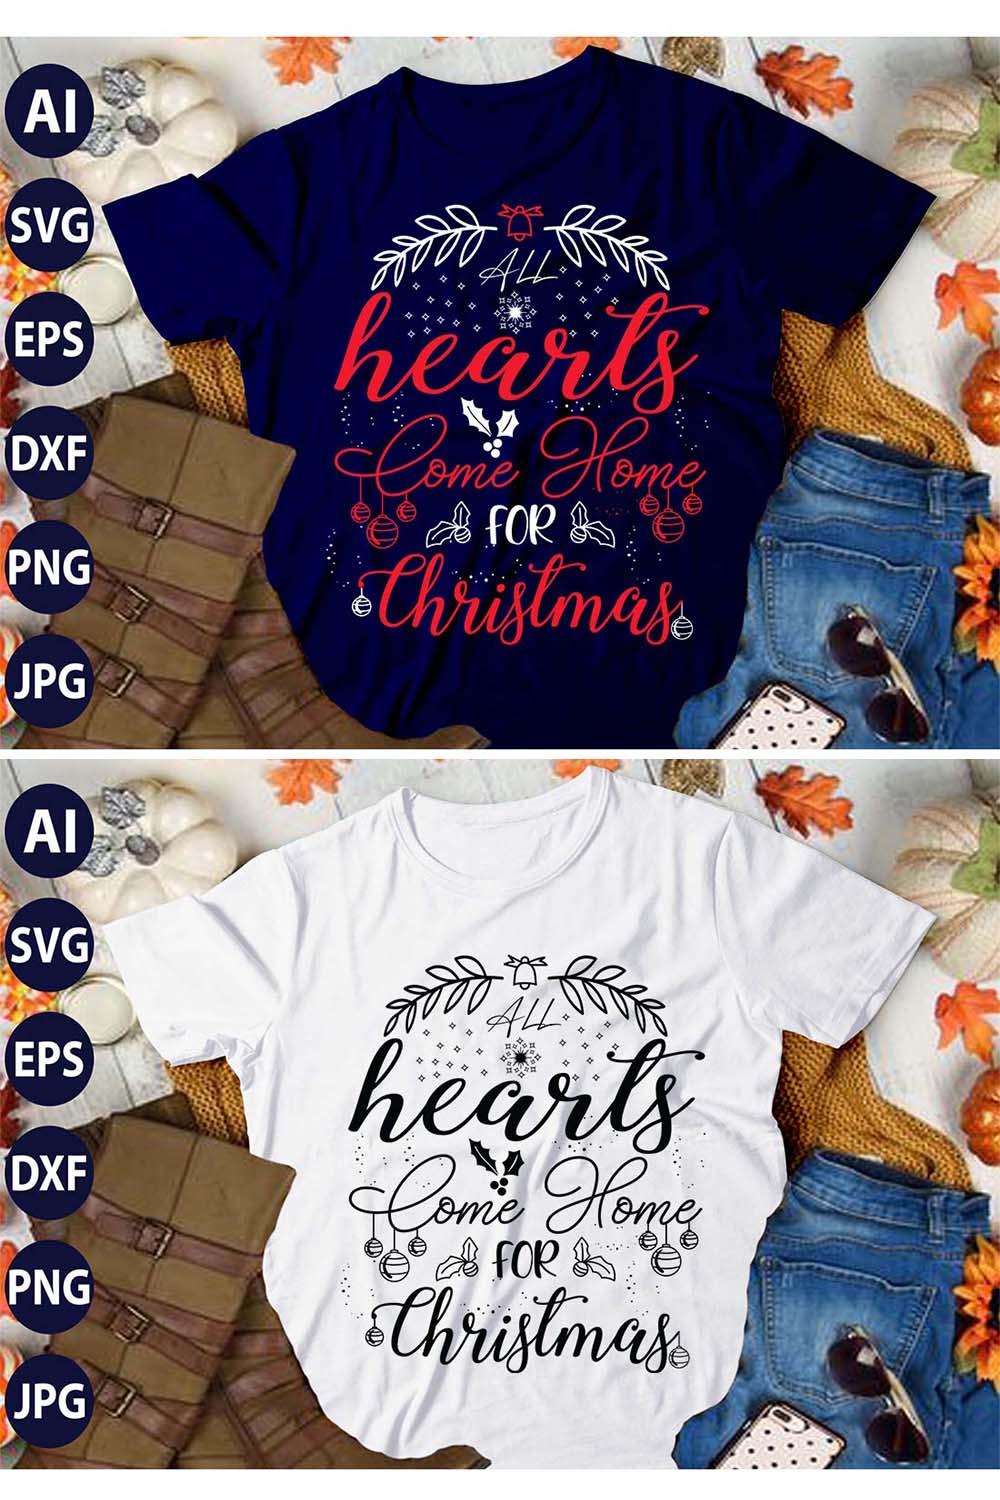 All Hearts Come Home For Christmas, SVG T-Shirt Design |Christmas Retro It's All About Jesus Typography Tshirt Design | Ai, Svg, Eps, Dxf, Jpeg, Png, Instant download T-Shirt | 100% print-ready Digital vector file pinterest preview image.